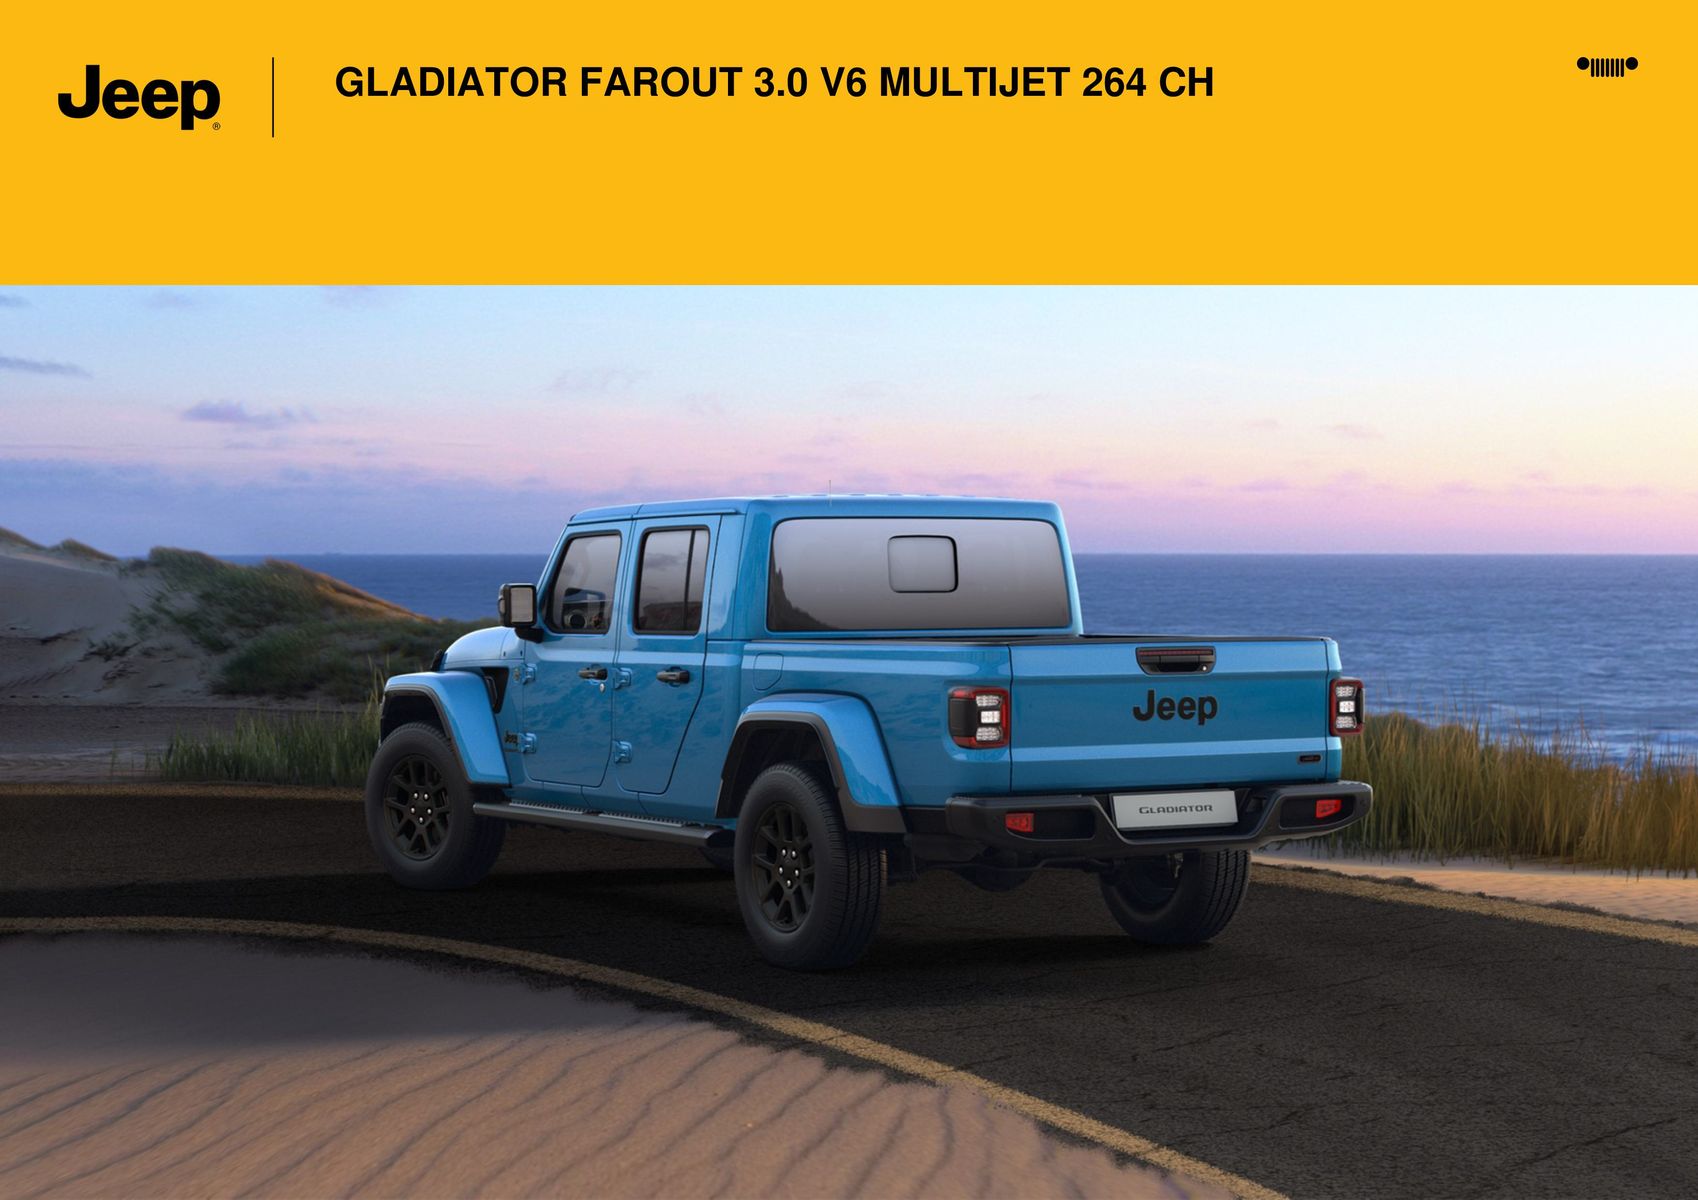 Catalogue GLADIATOR FAROUT 3.0 V6 MULTIJET 264 CH-, page 00012